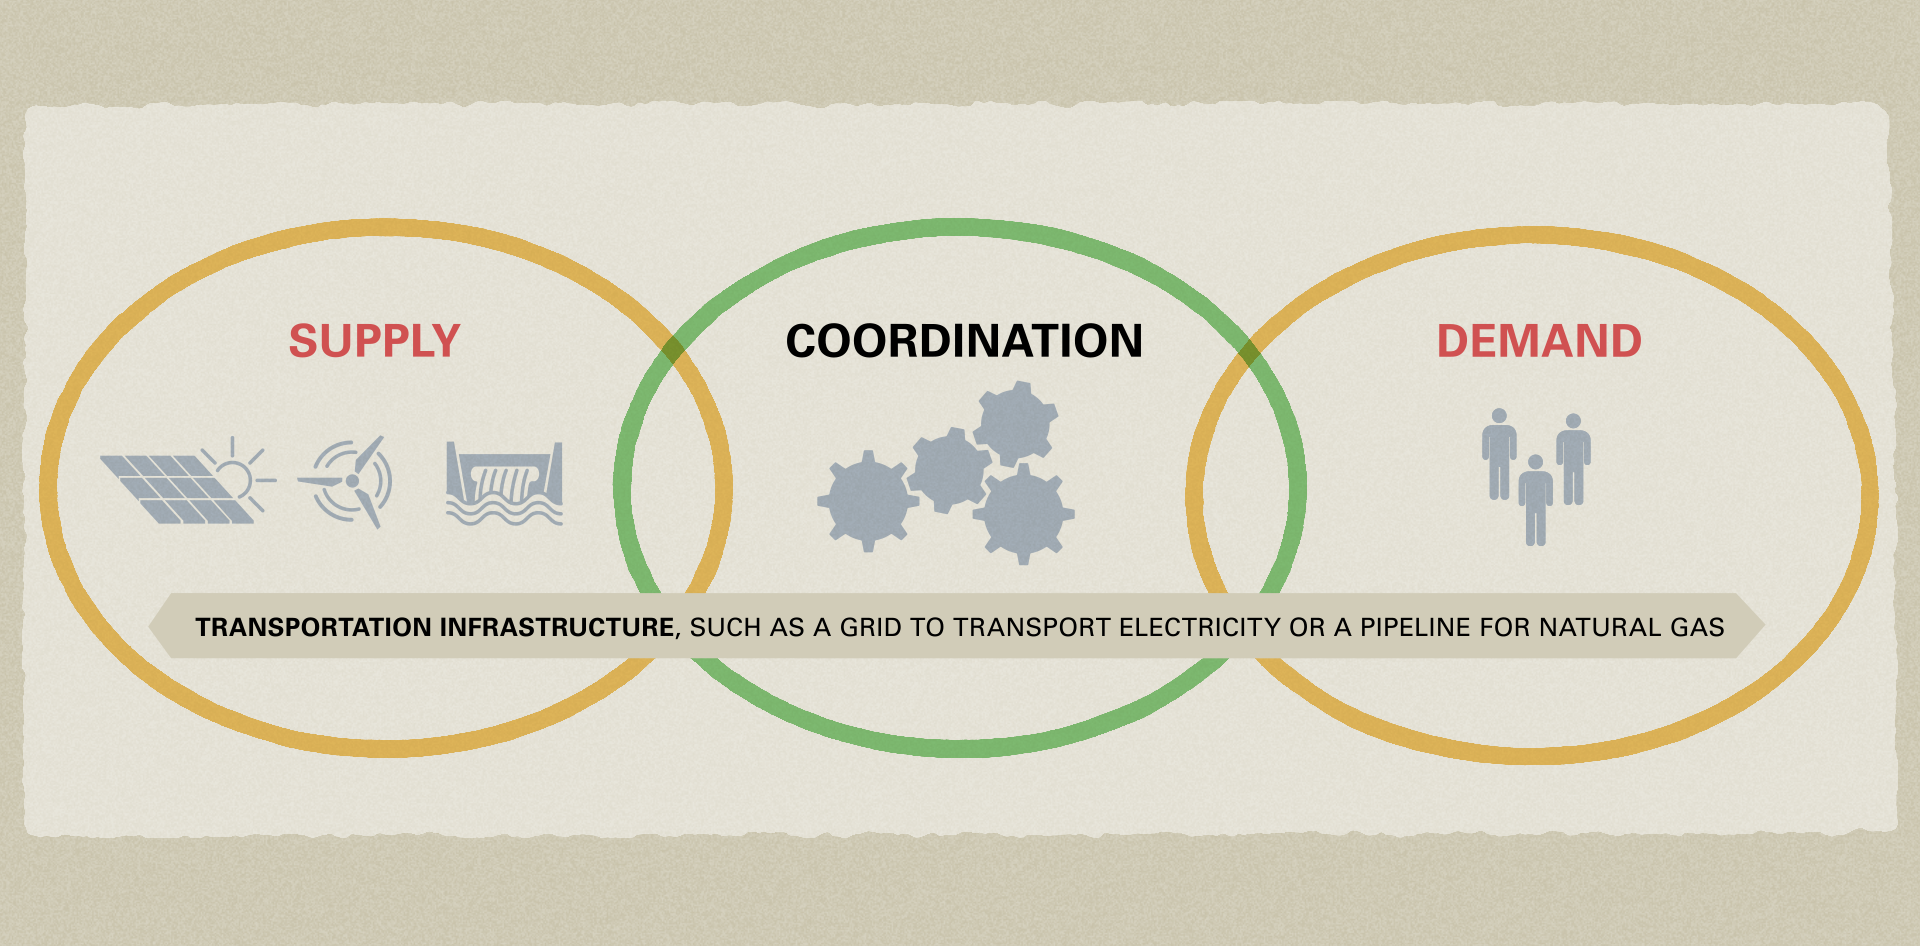 Image showing the three main elements of an energy system: three circles with the words “Supply”, “Coordination” and “Demand” in them, and the sentence “transportation infrastructure, such as a grid to transport electricity or a pipeline for natural gas” connecting the three circles.